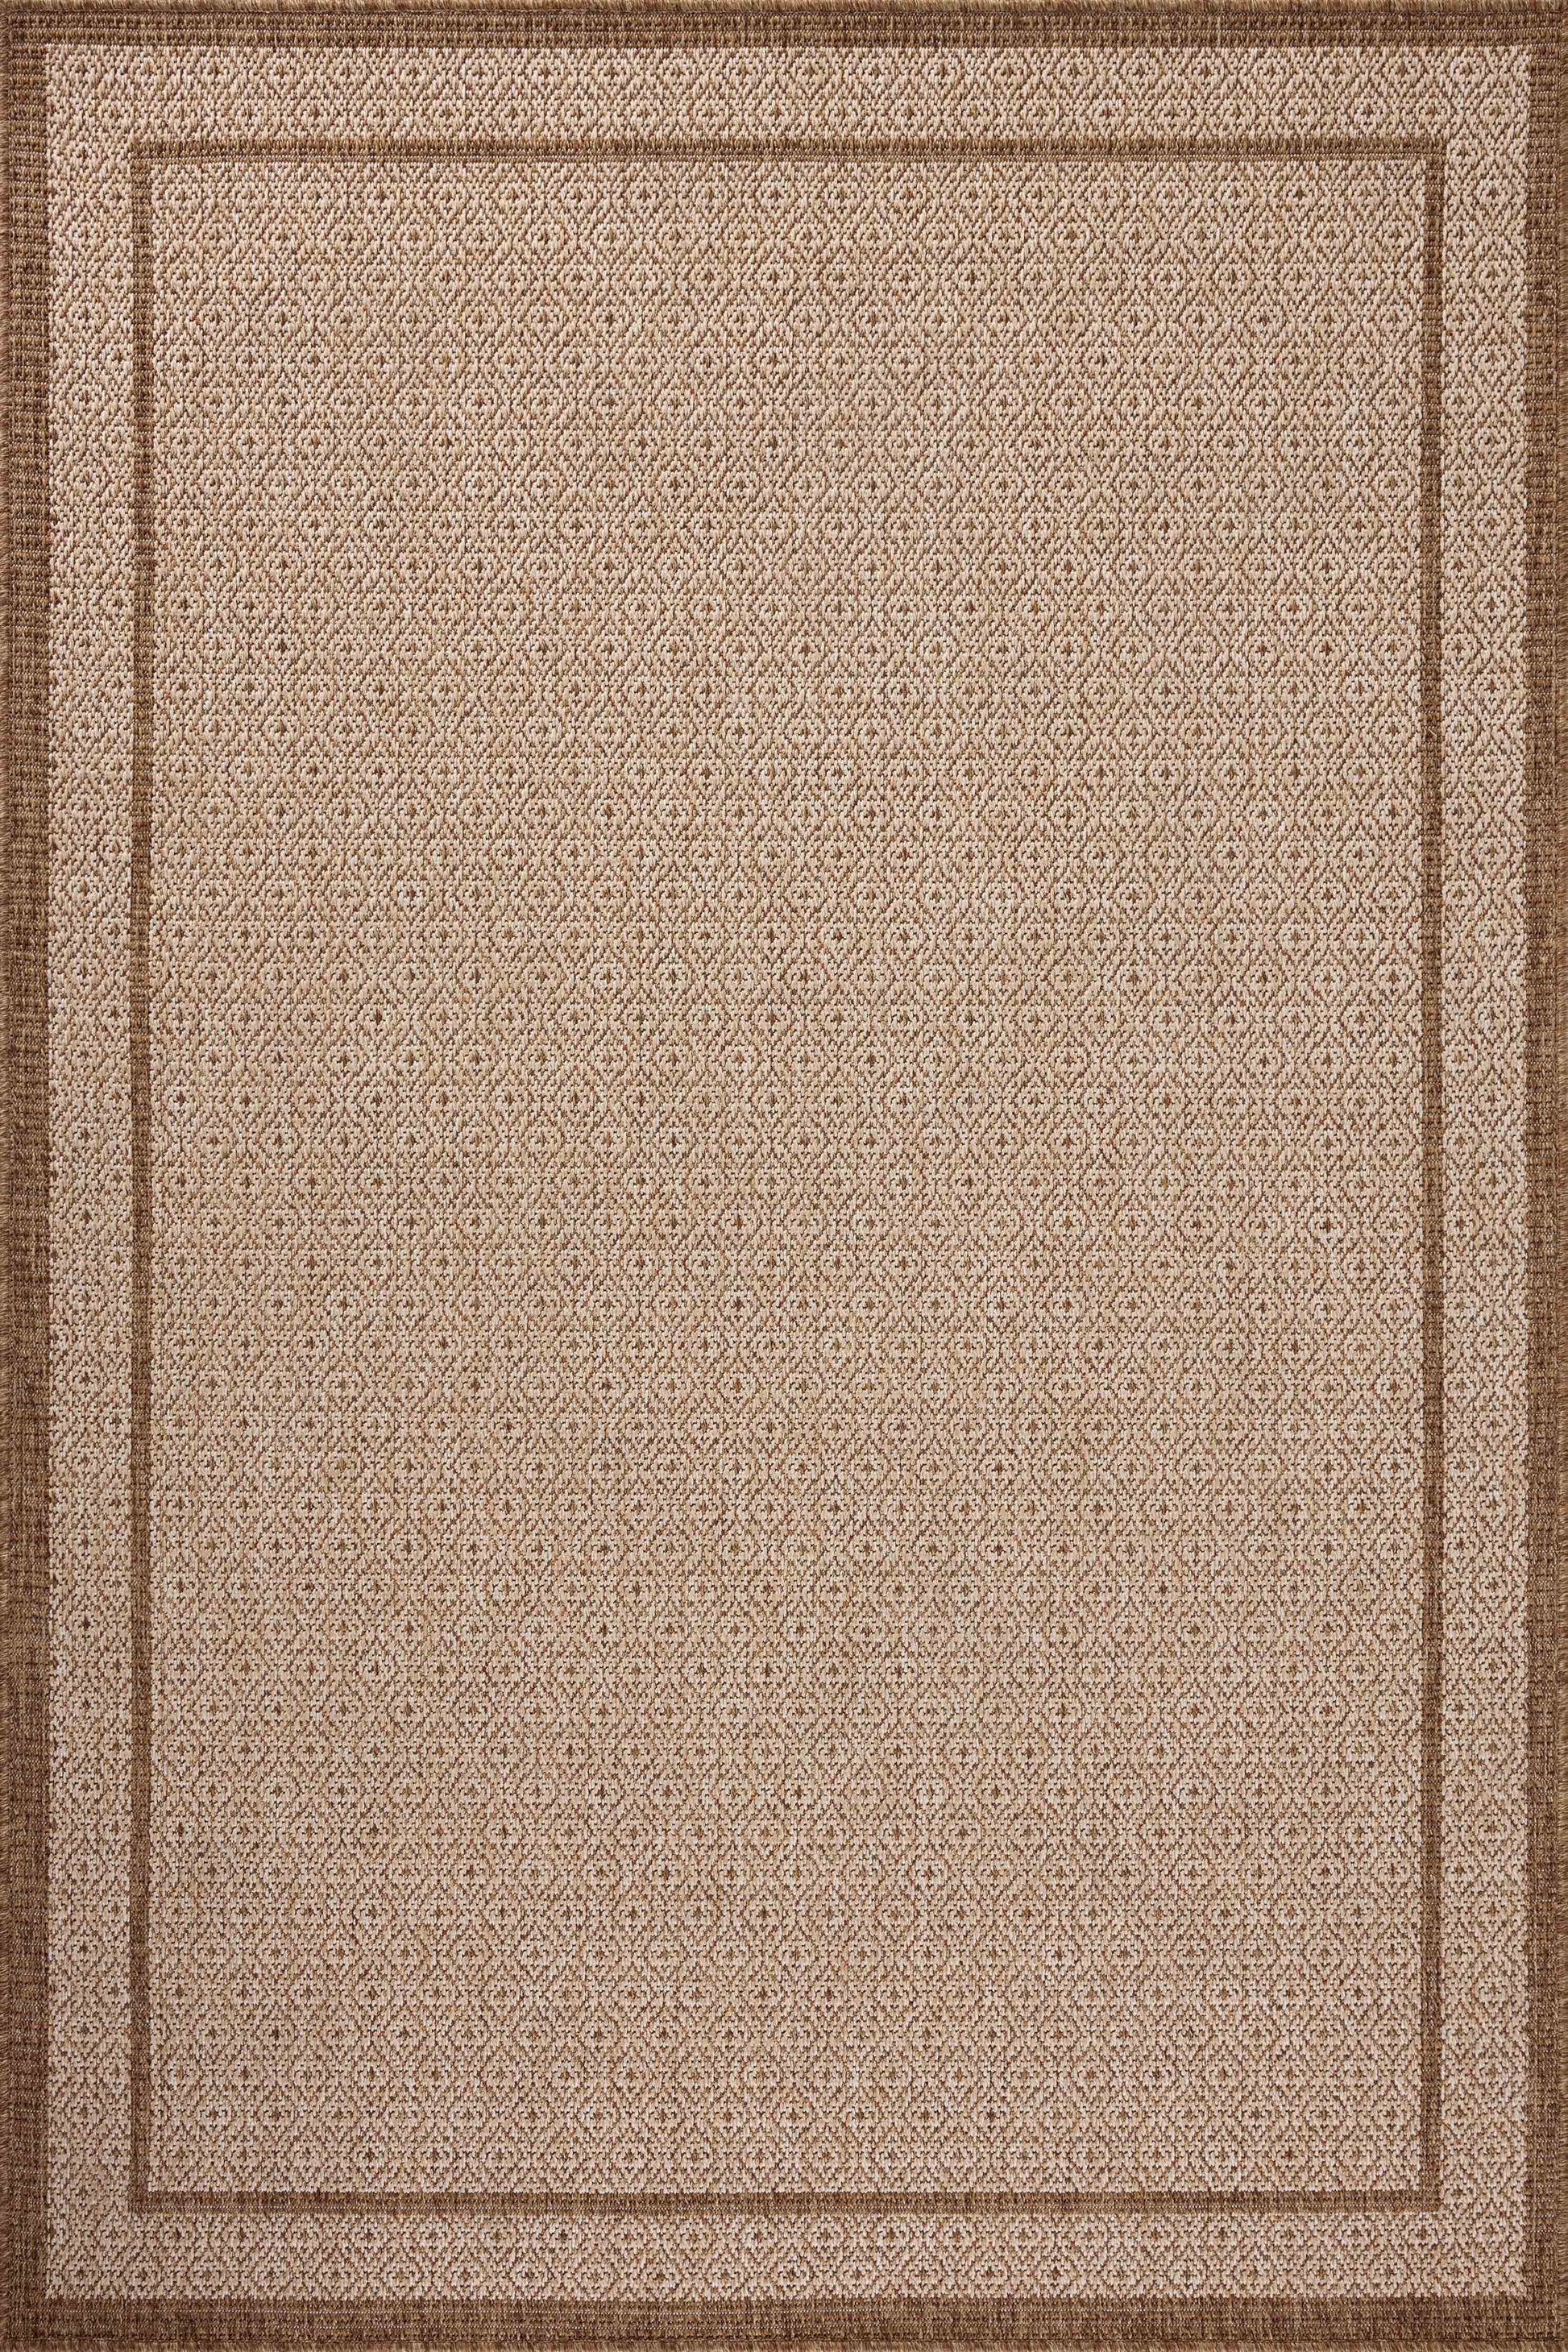 A picture of Loloi's Merrick rug, in style MER-05, color Chestnut / Oatmeal